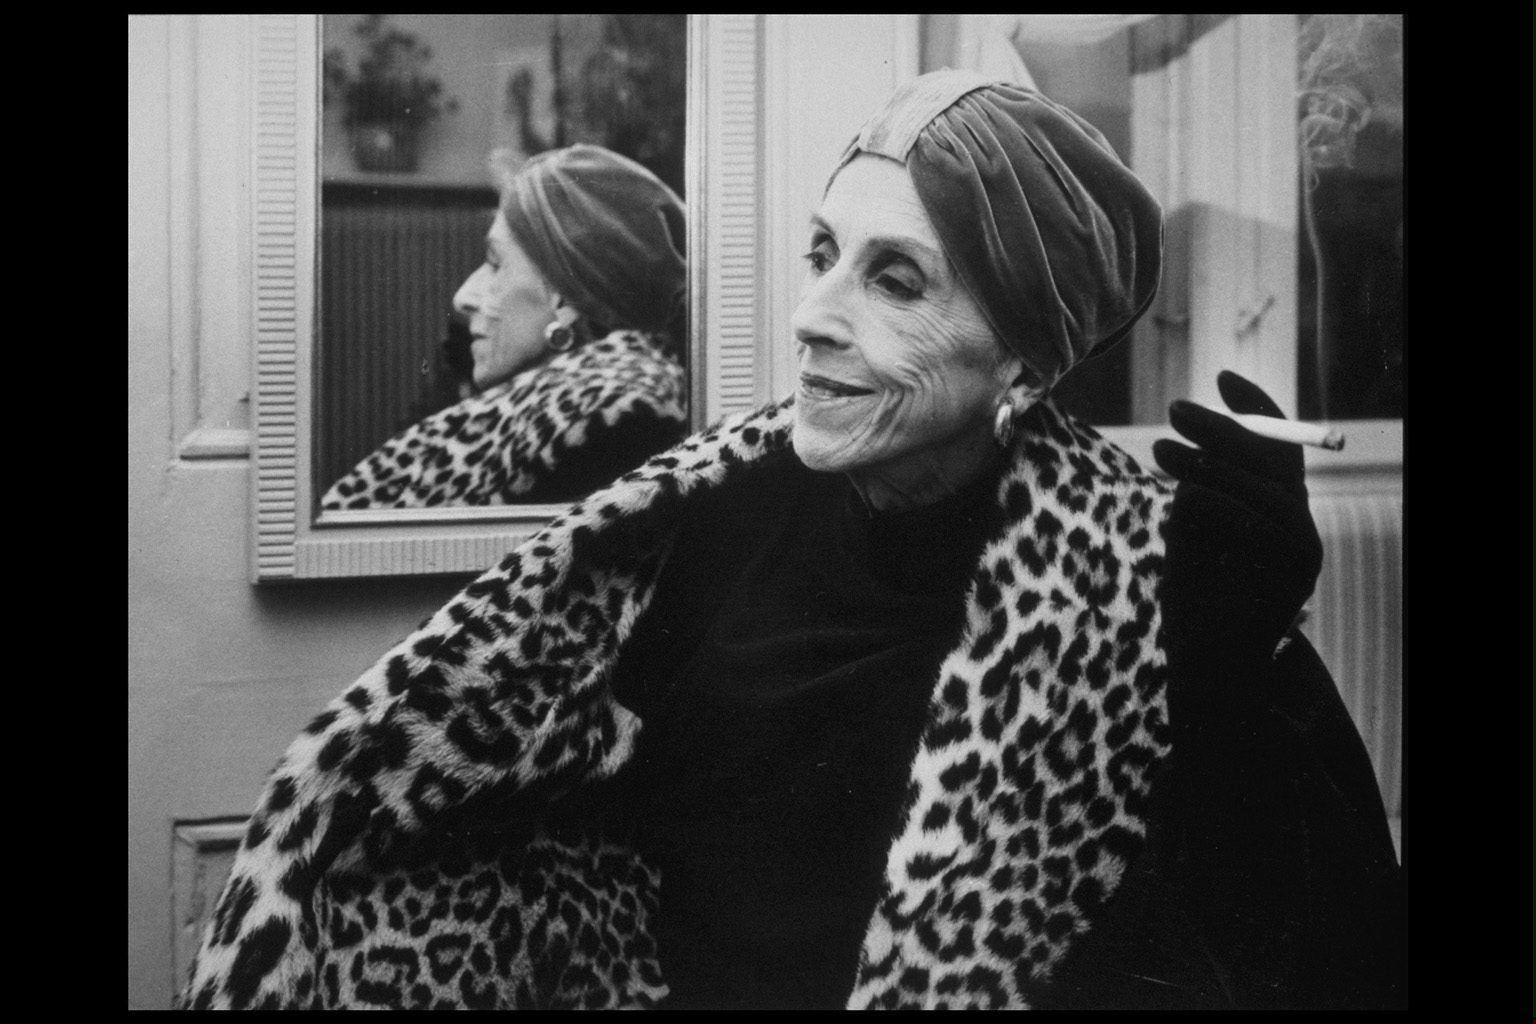 Baroness Karen Blixen (aka Danish writer Isak Dinesen) (1885 - 1962) stands in front of a mirror, wearing a velvet turban and leopard stole and holding a cigarette, January 2, 1958. (Photo by Getty Images)